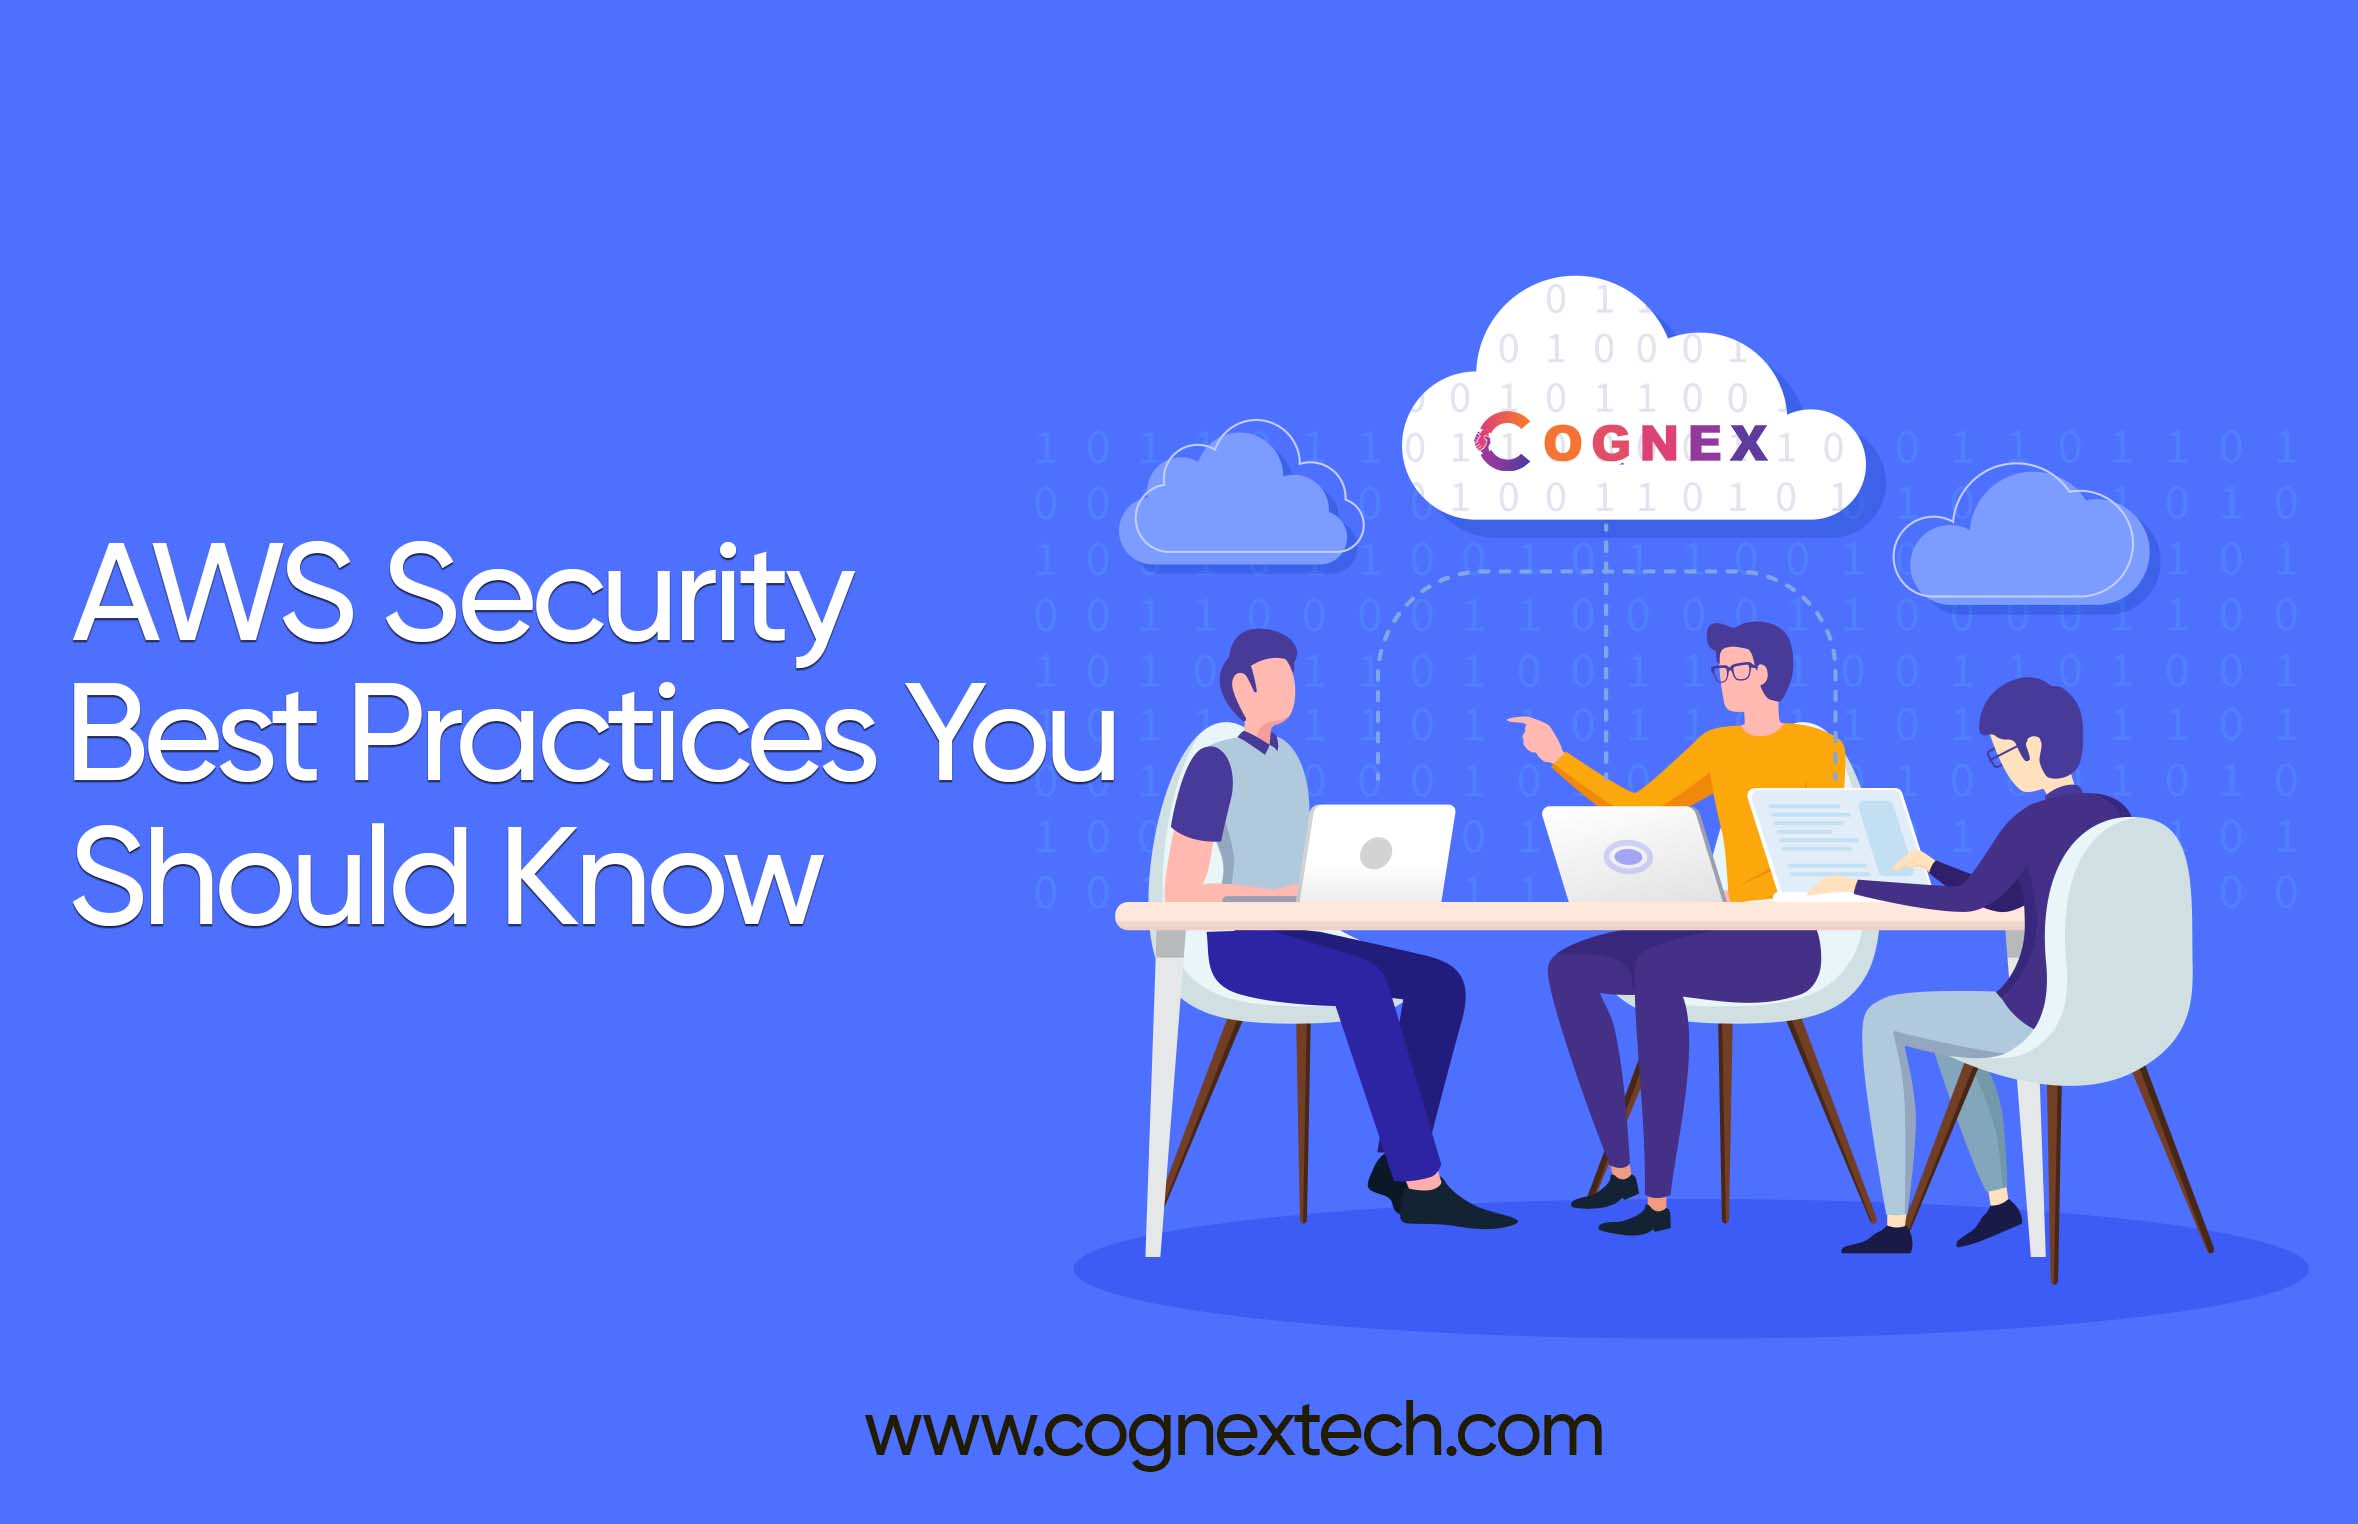 AWS Security Best Practices You Should Know